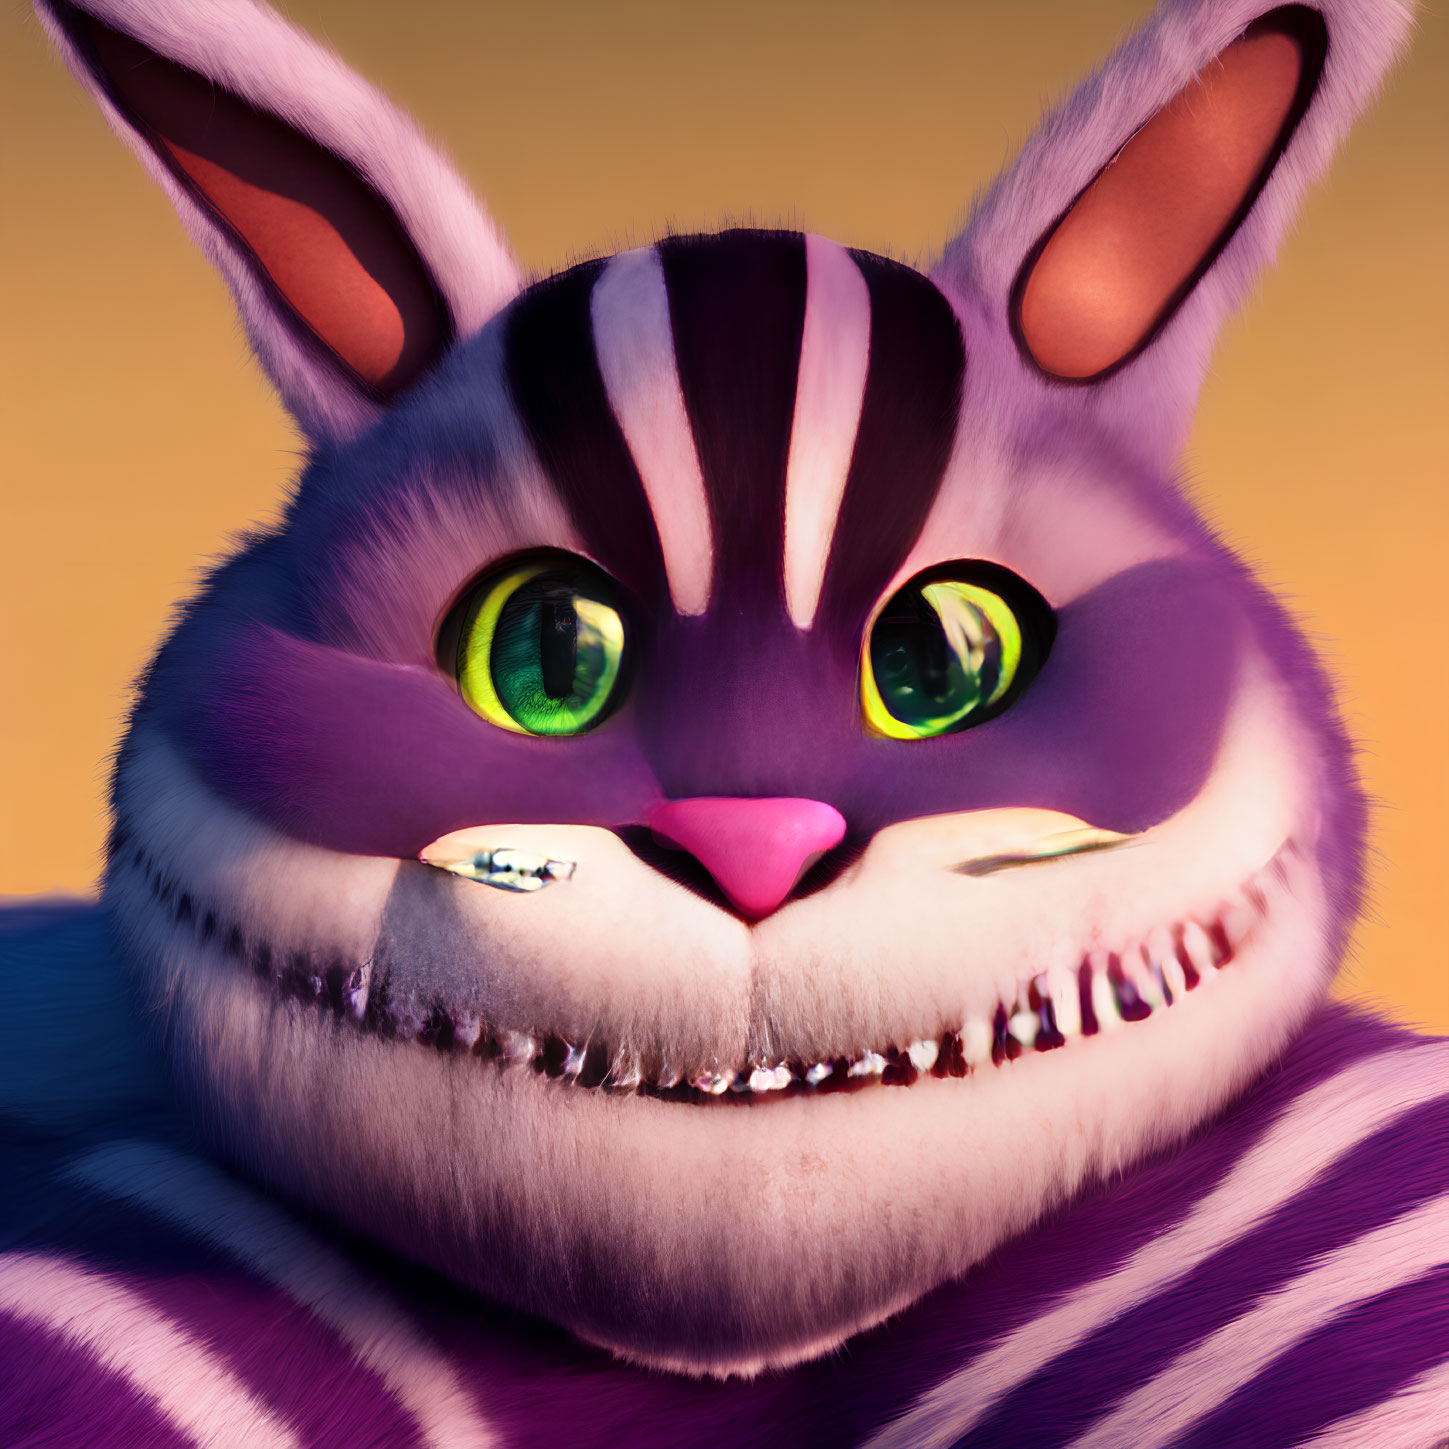 Fantastical purple and white striped cat-like creature with intense green eyes and sharp teeth